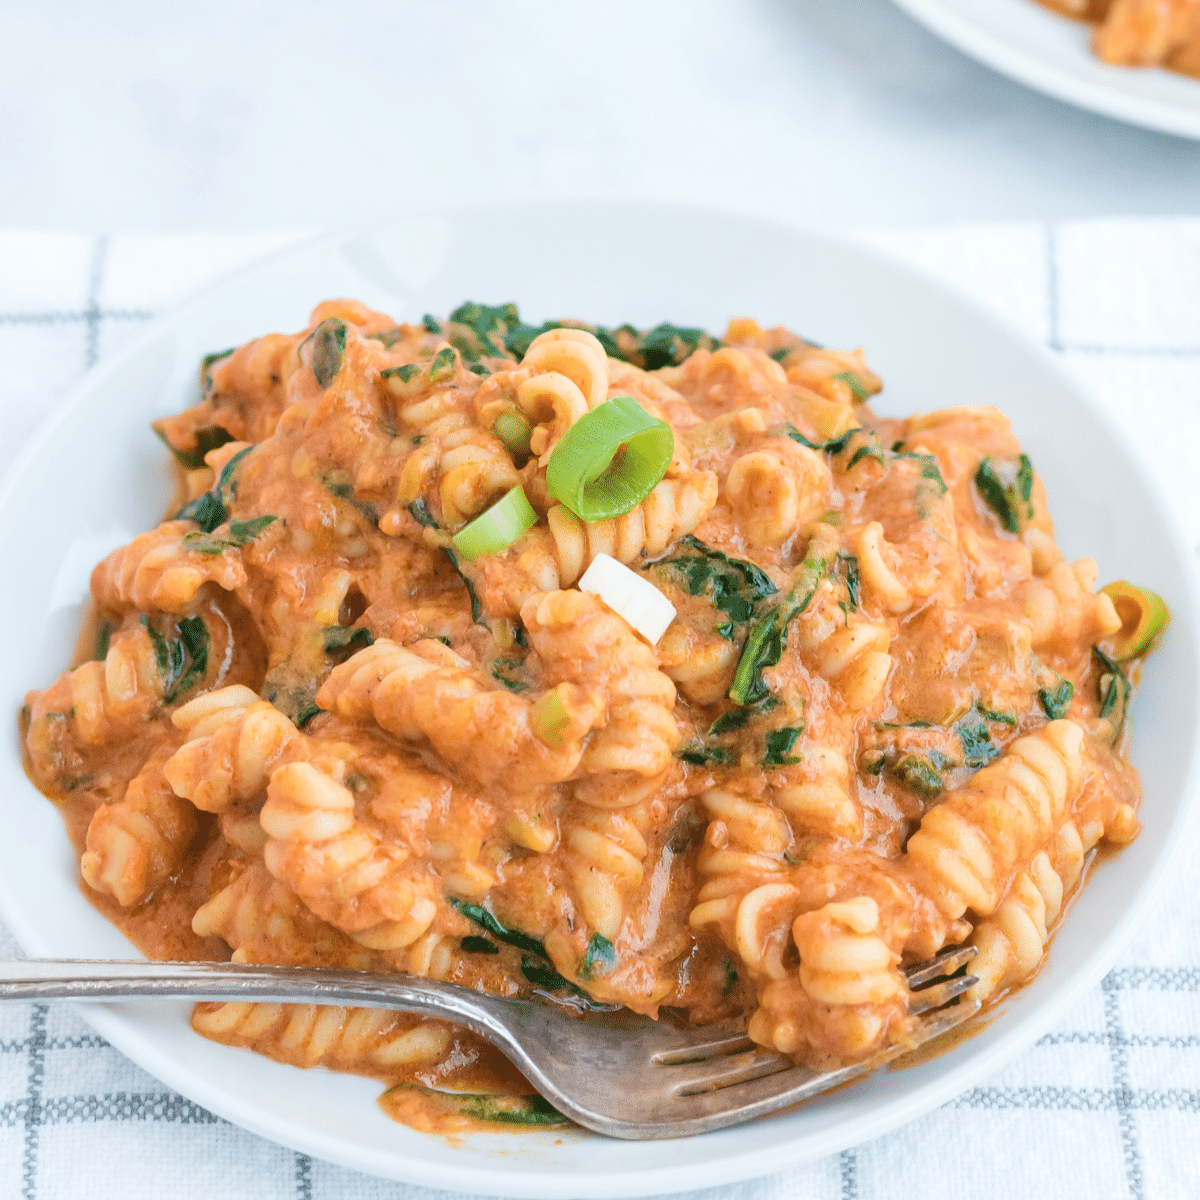 a plate of pasta with spinach and creamy red sauce